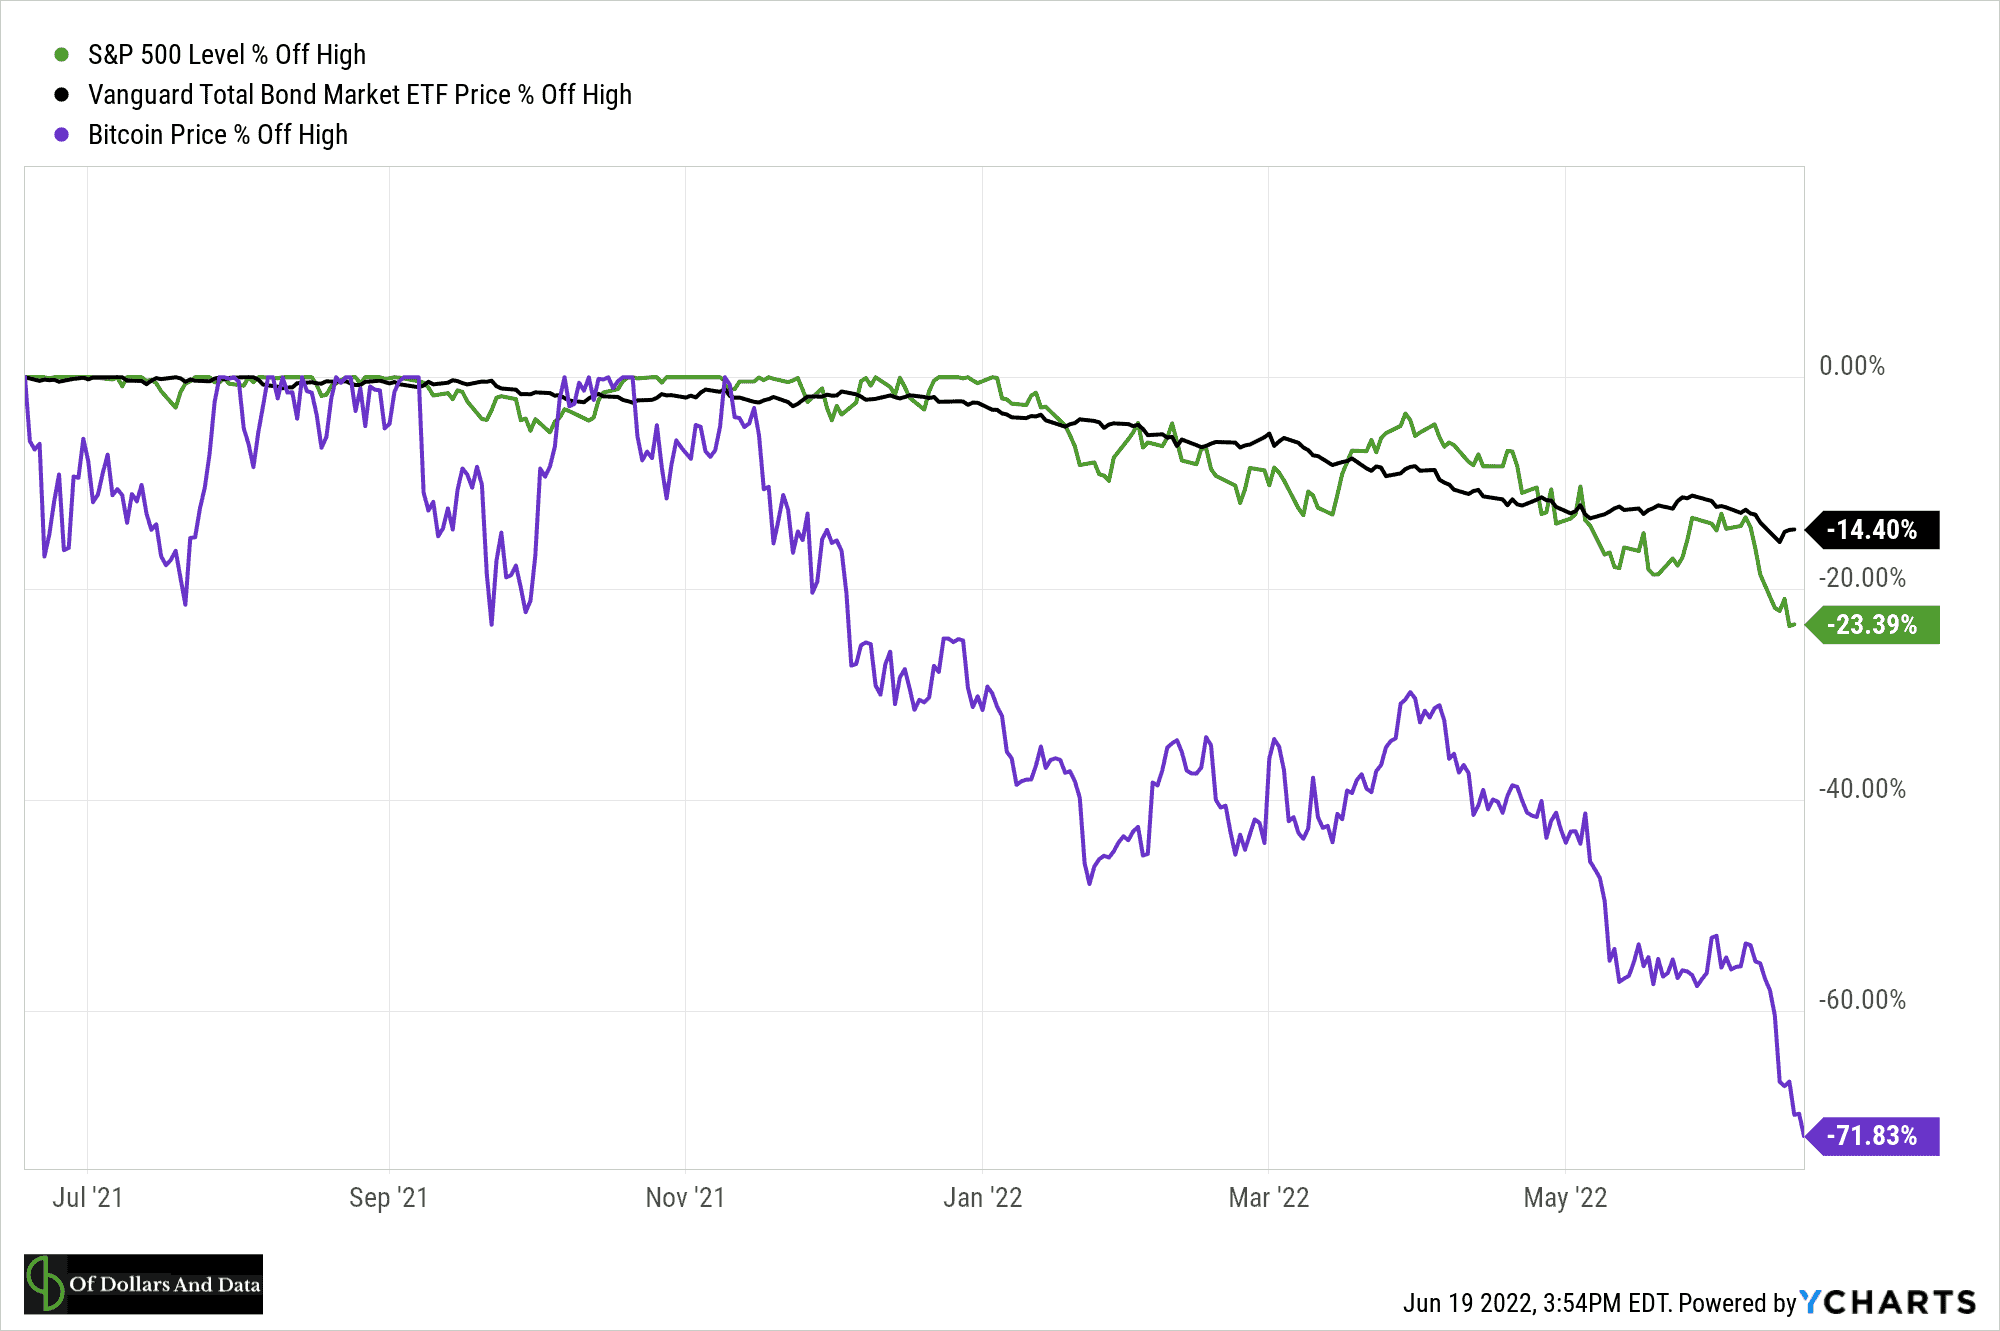 S&P 500, Bonds, and Bitcoin price declines in 2022.